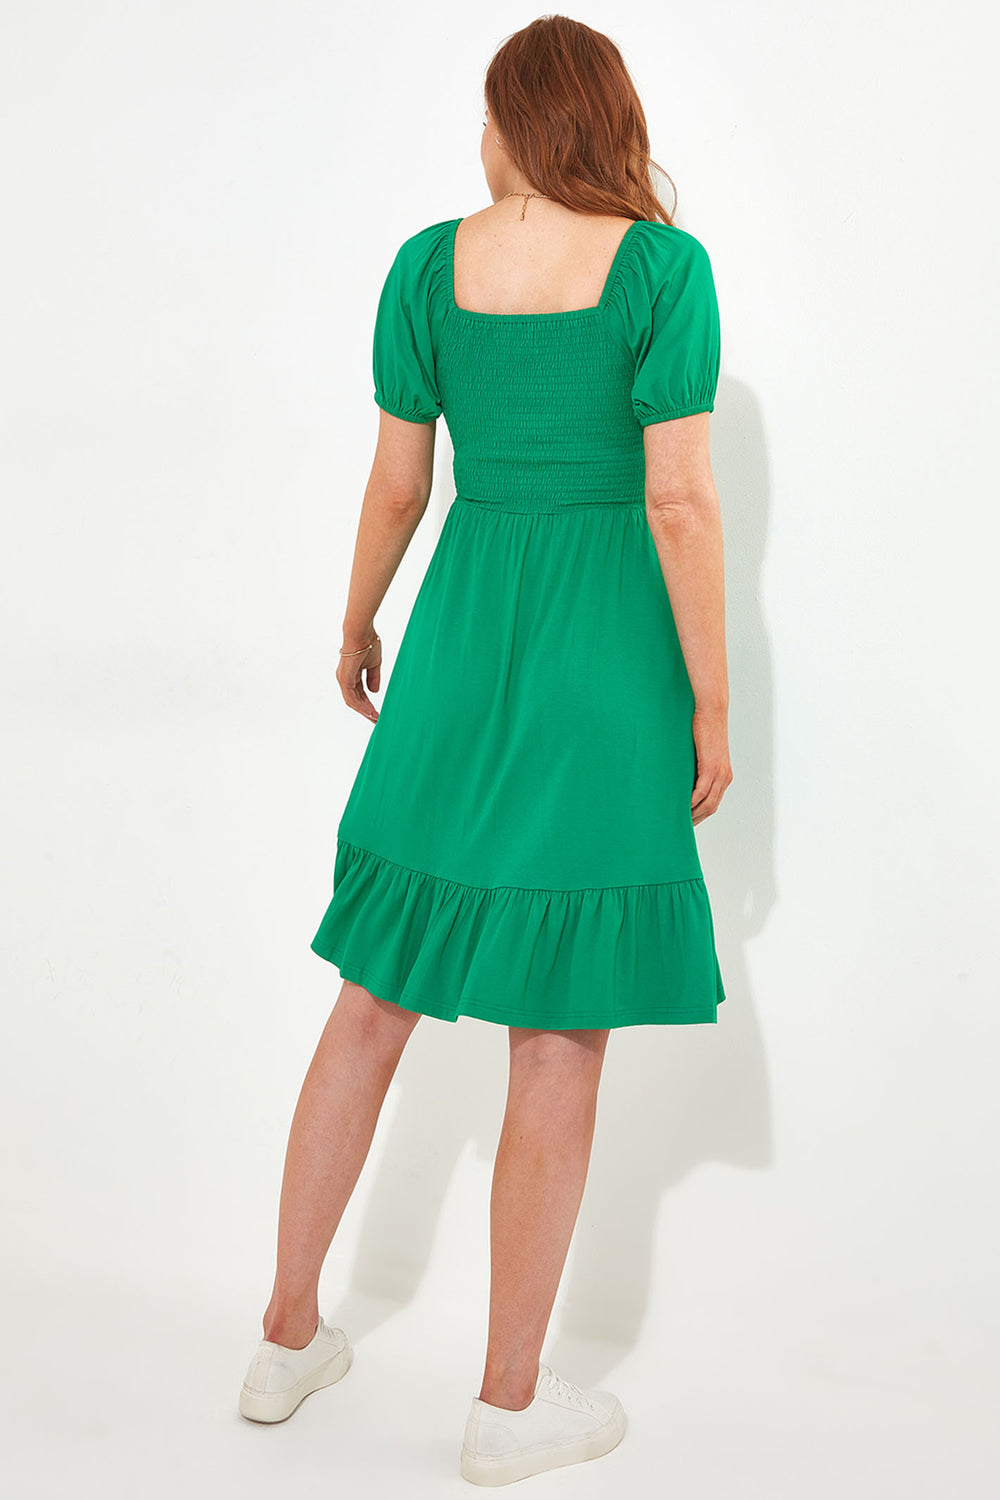 Joe Browns WE943 Green Mia Shirred Jersey Dress - Experience Boutique